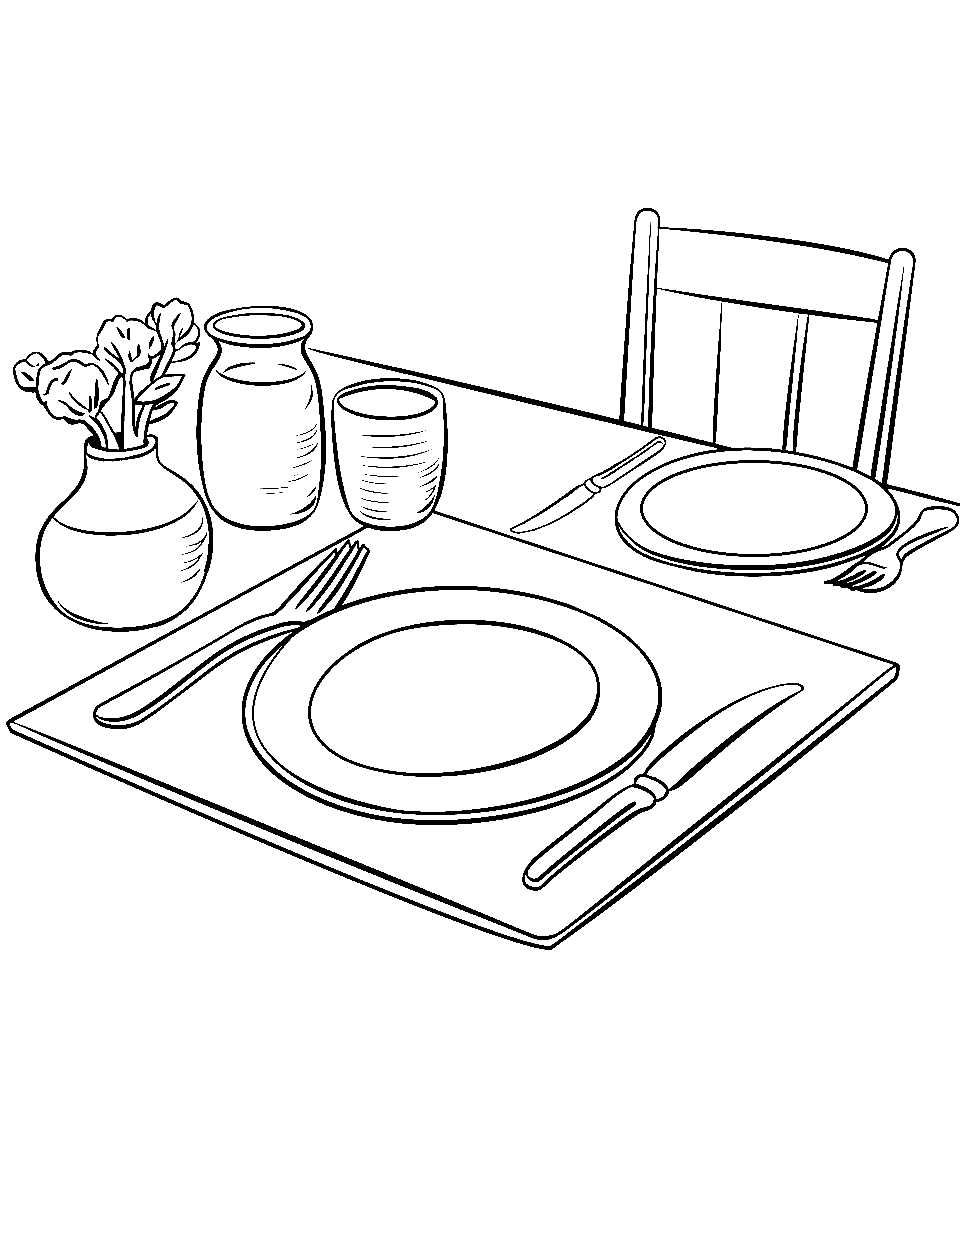 Restaurant Table Setup Food Coloring Page - A table set with plates and glasses.